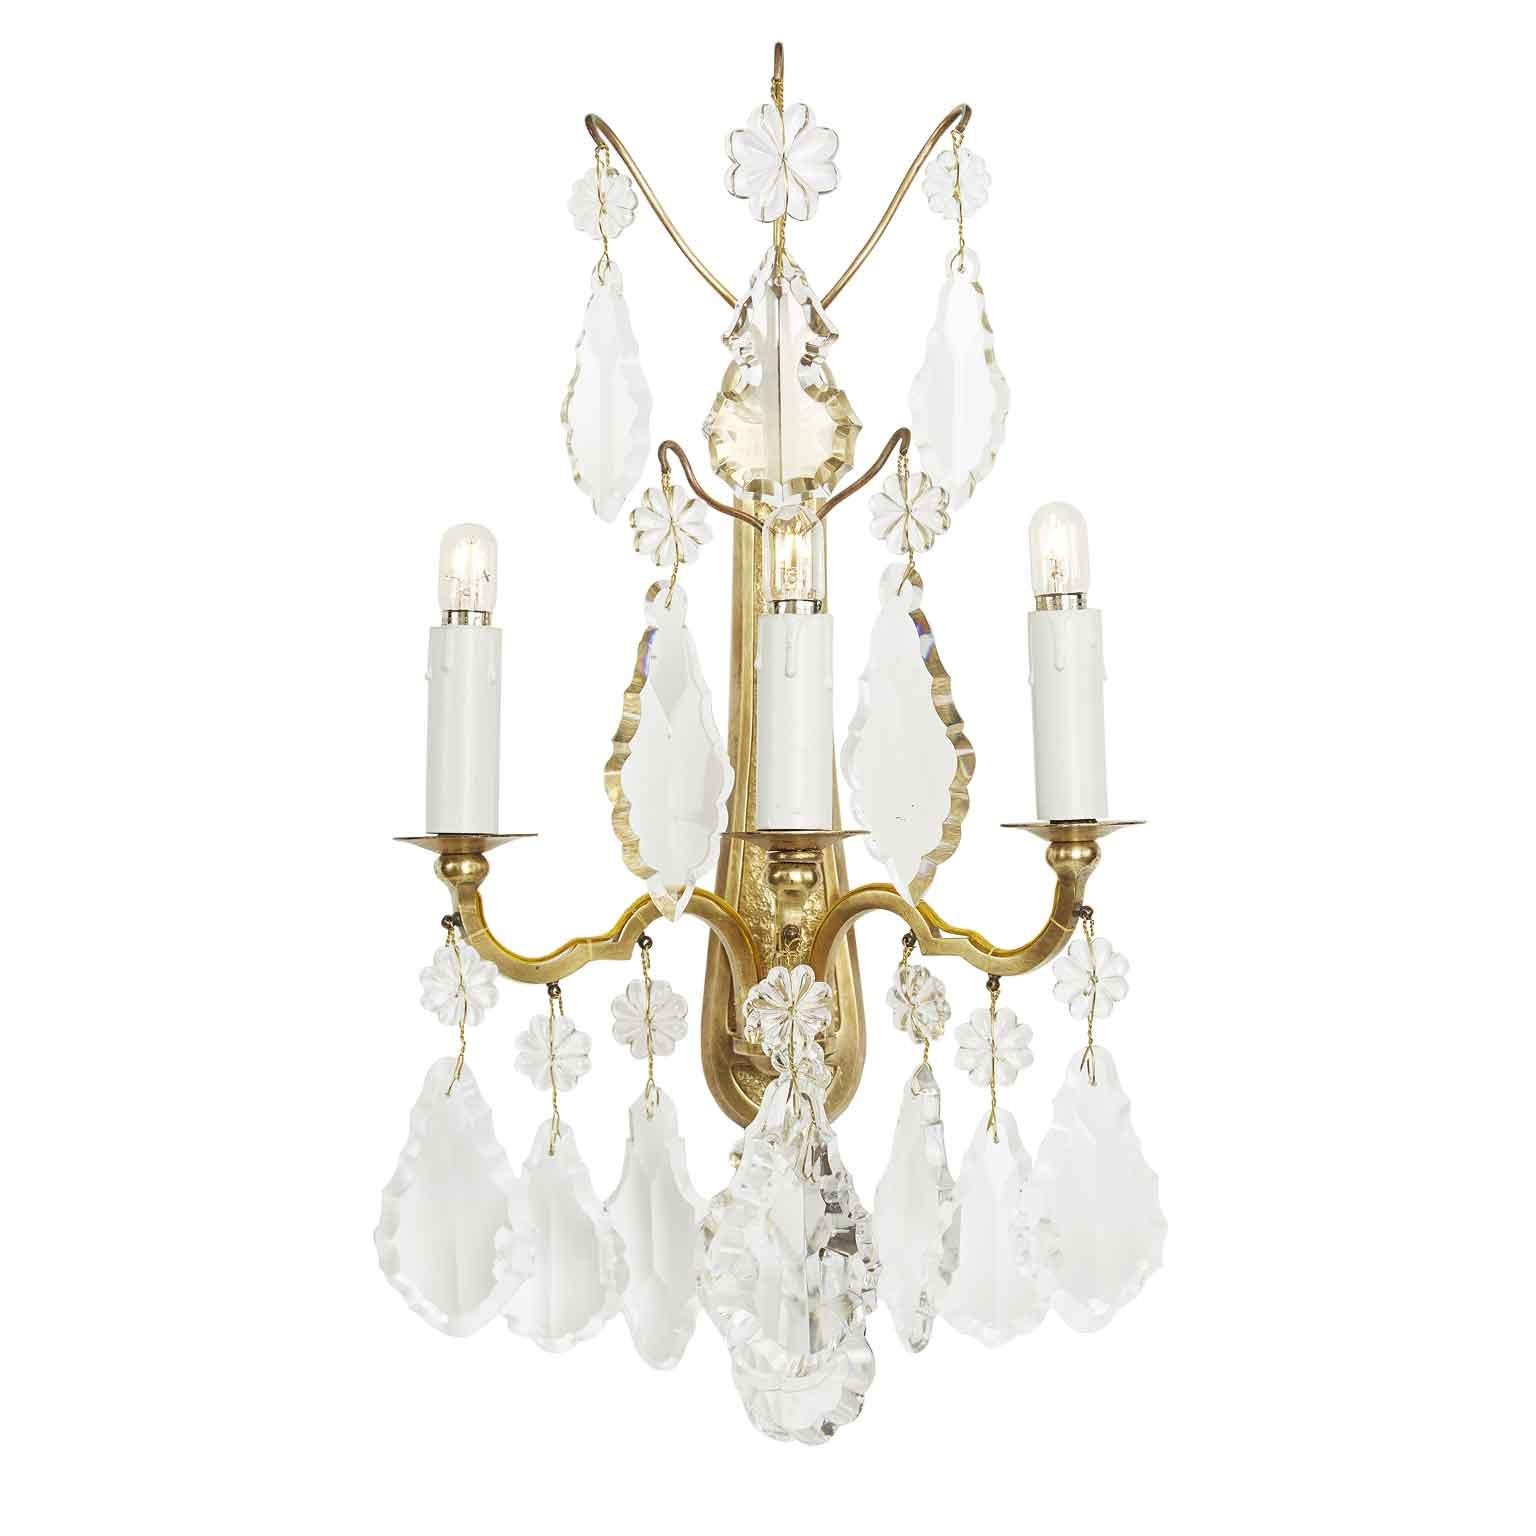 Four French Baccarat sconces dating back to early 1900, set of four three-light gilded bronze wall lamps , with fan shaped crystals. They are of French origin, as evidenced by the engraving of the legendary French Baccarat mark at the base of each